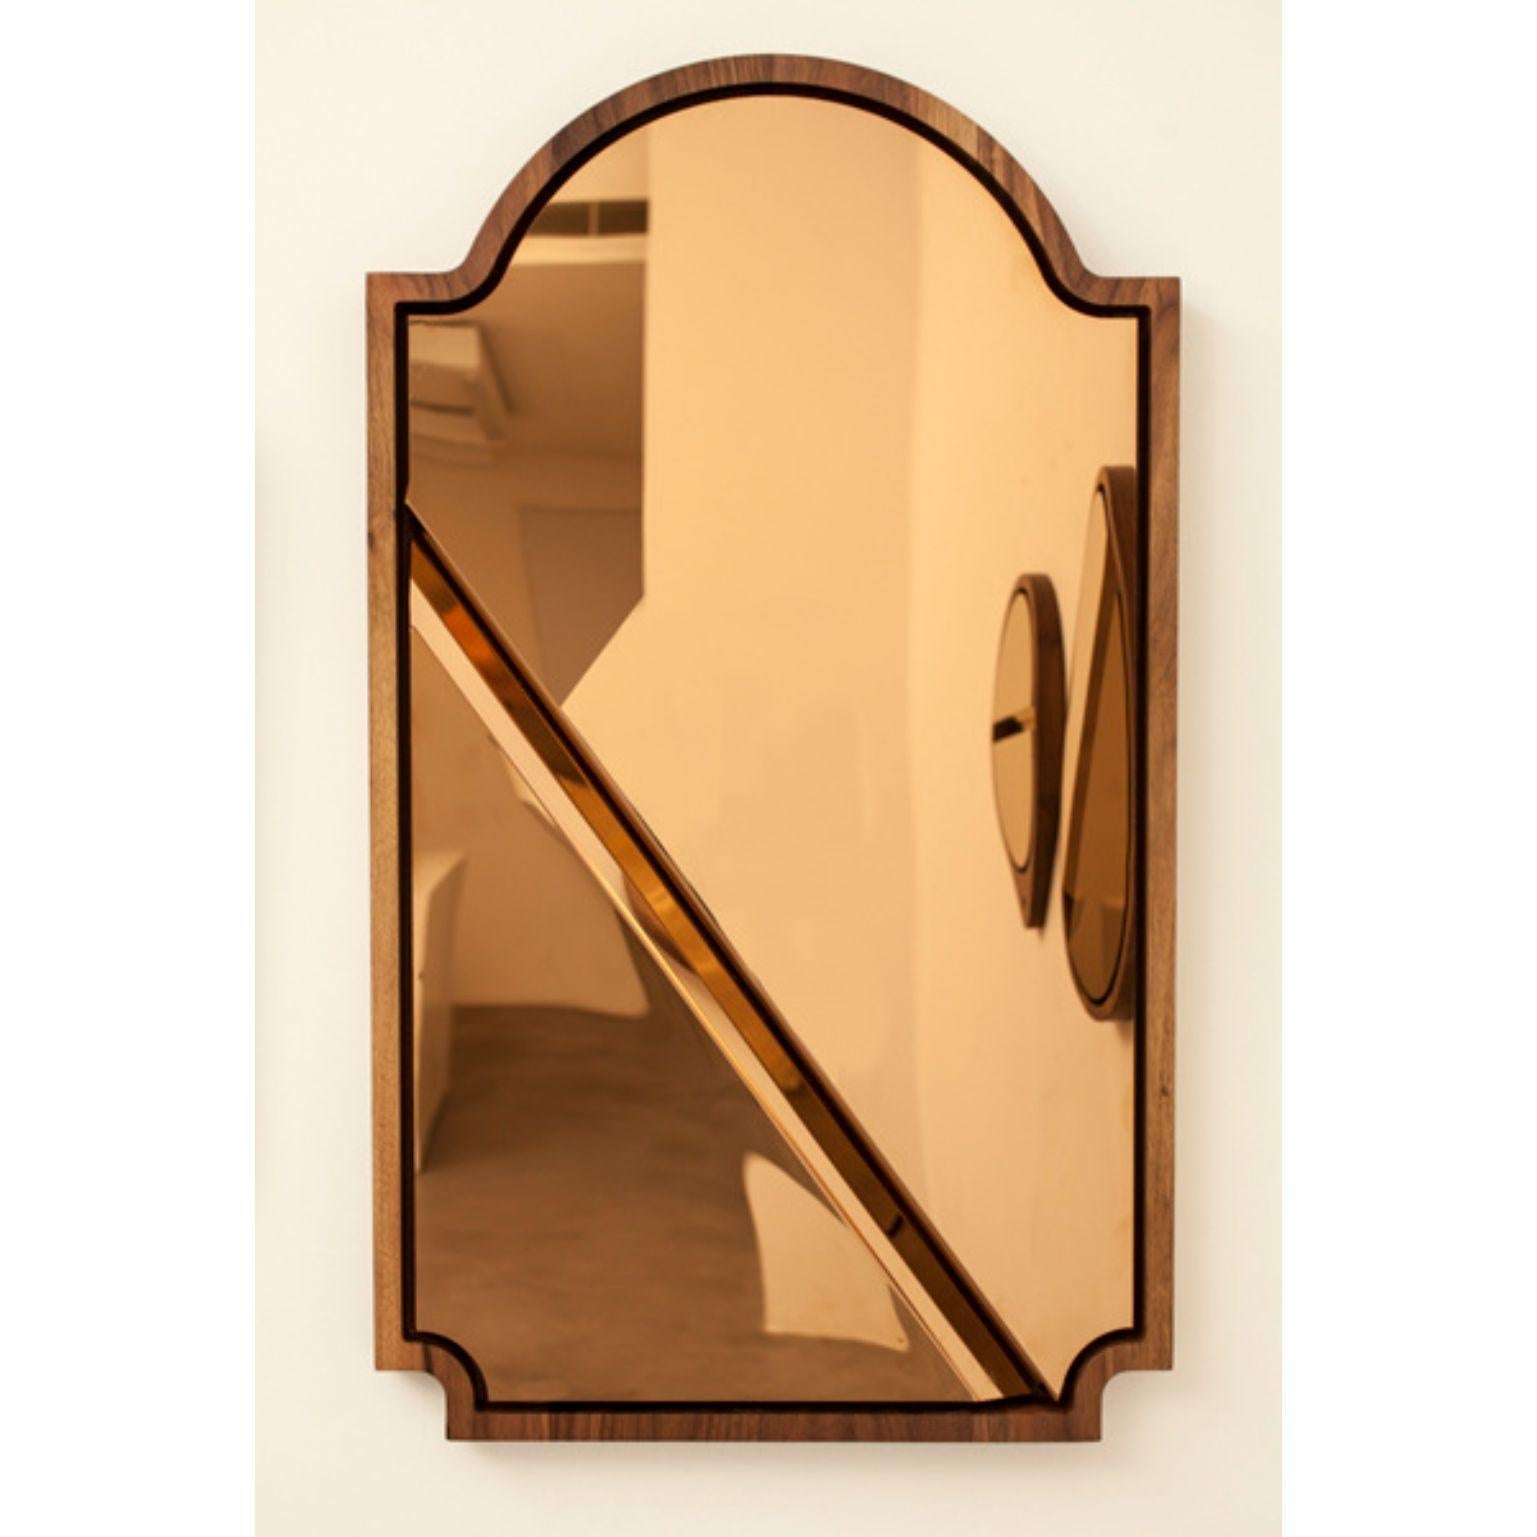 Please don't tell mom mirror 3 by Marc Dibeh
2015
Materials: American walnut, polished stainless steel, rose gold finish
Dimensions: W 56 x H 93 x D 4 cm 

This happy accident, caused by coincidently breaking a mirror during an experiment, lead